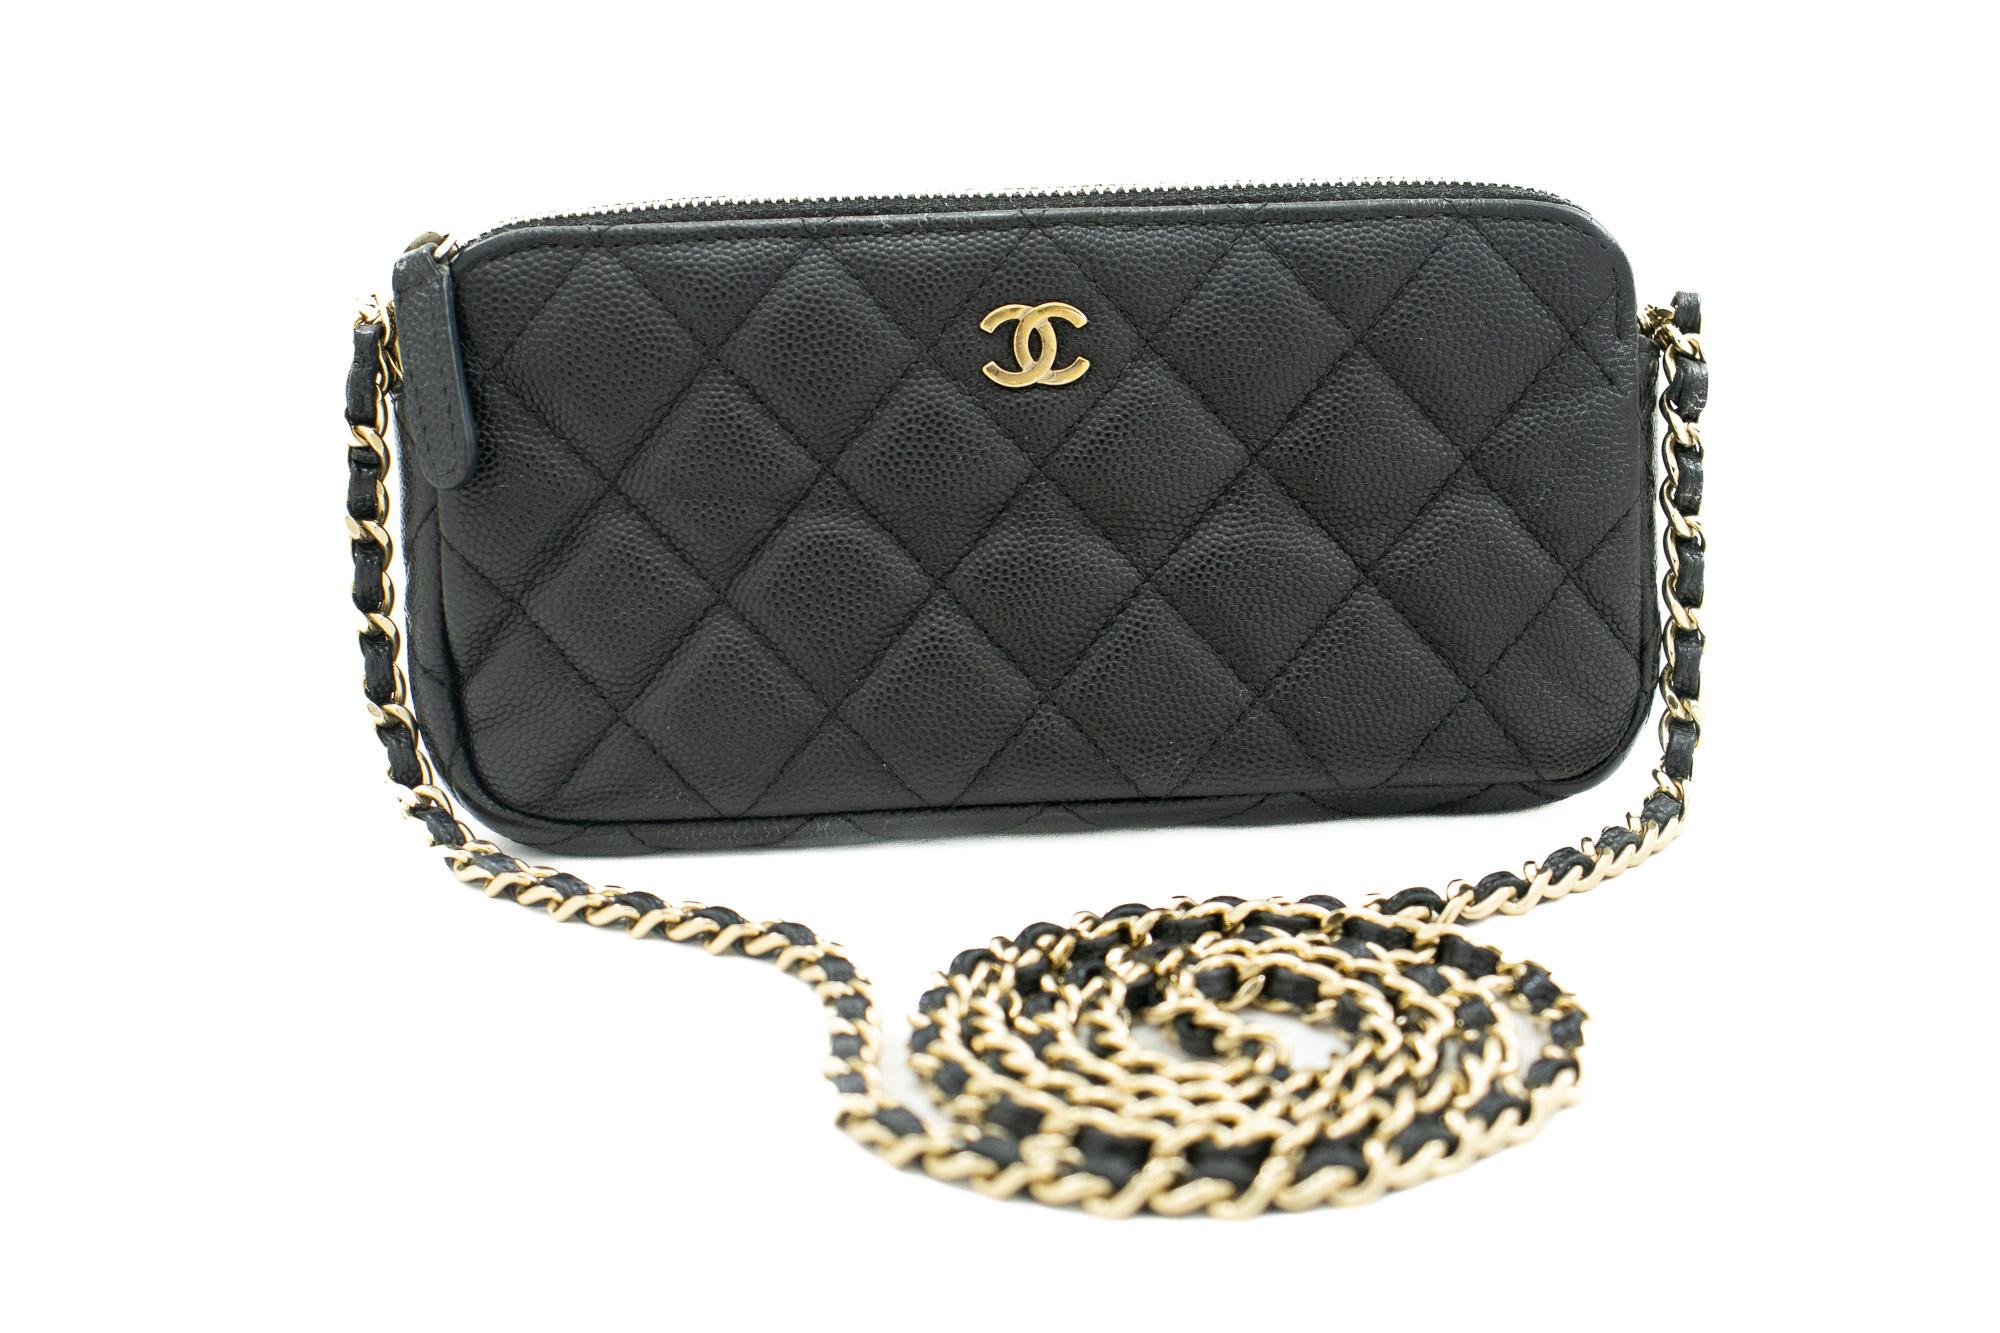 An authentic CHANEL Caviar Wallet On Chain WOC Double Zip Chain Shoulder Bag. The color is Black. The outside material is Leather. The pattern is Solid. This item is Contemporary. The year of manufacture would be 2016.
Conditions & Ratings
Outside